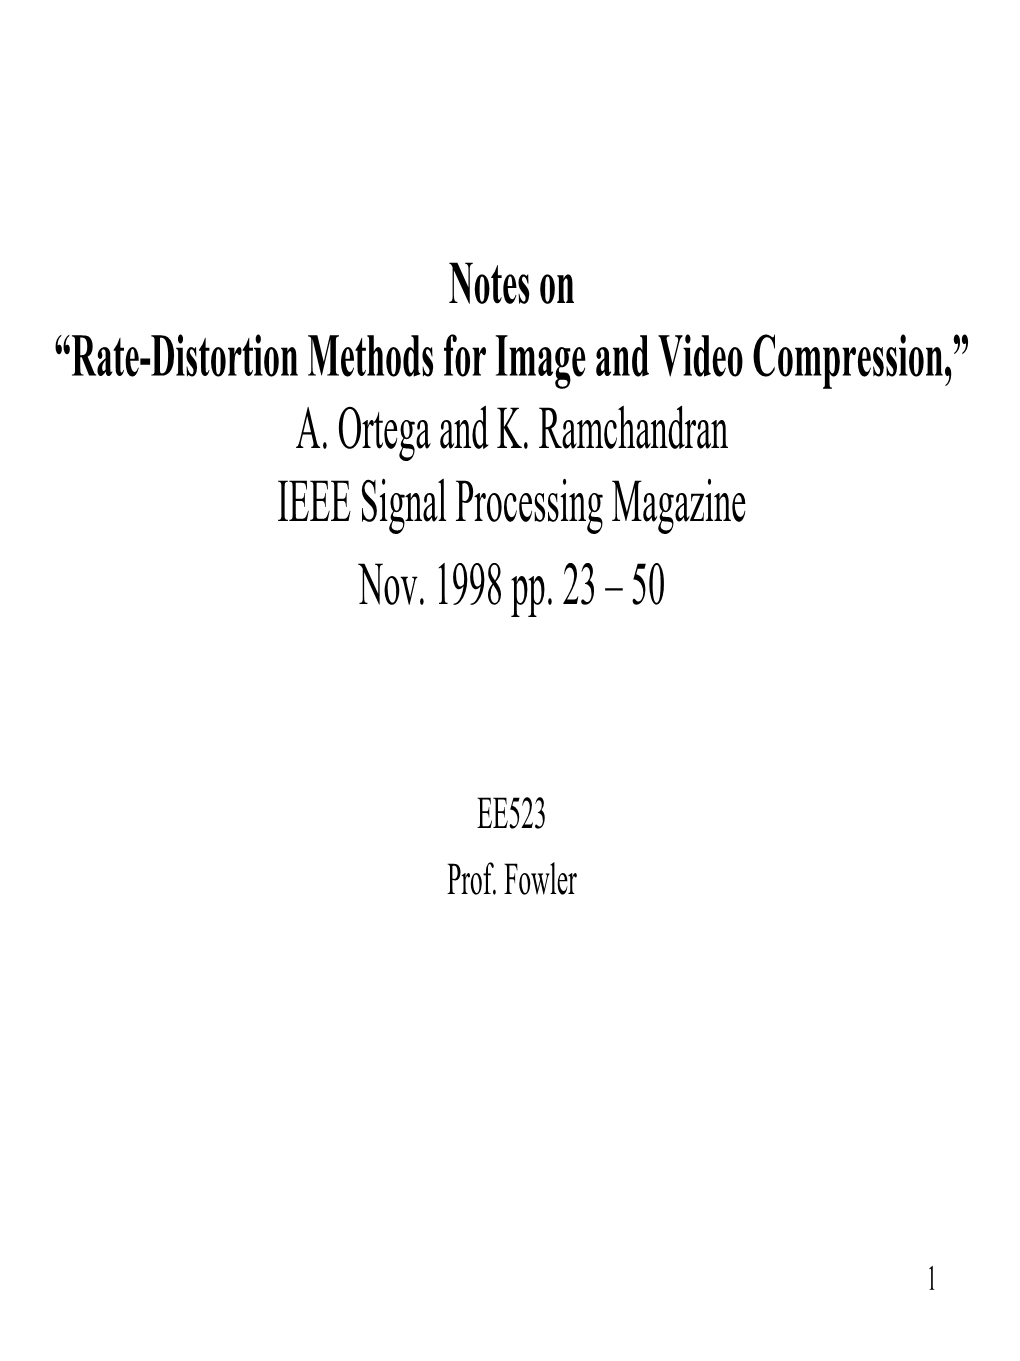 Notes on “Rate-Distortion Methods for Image and Video Compression,” A